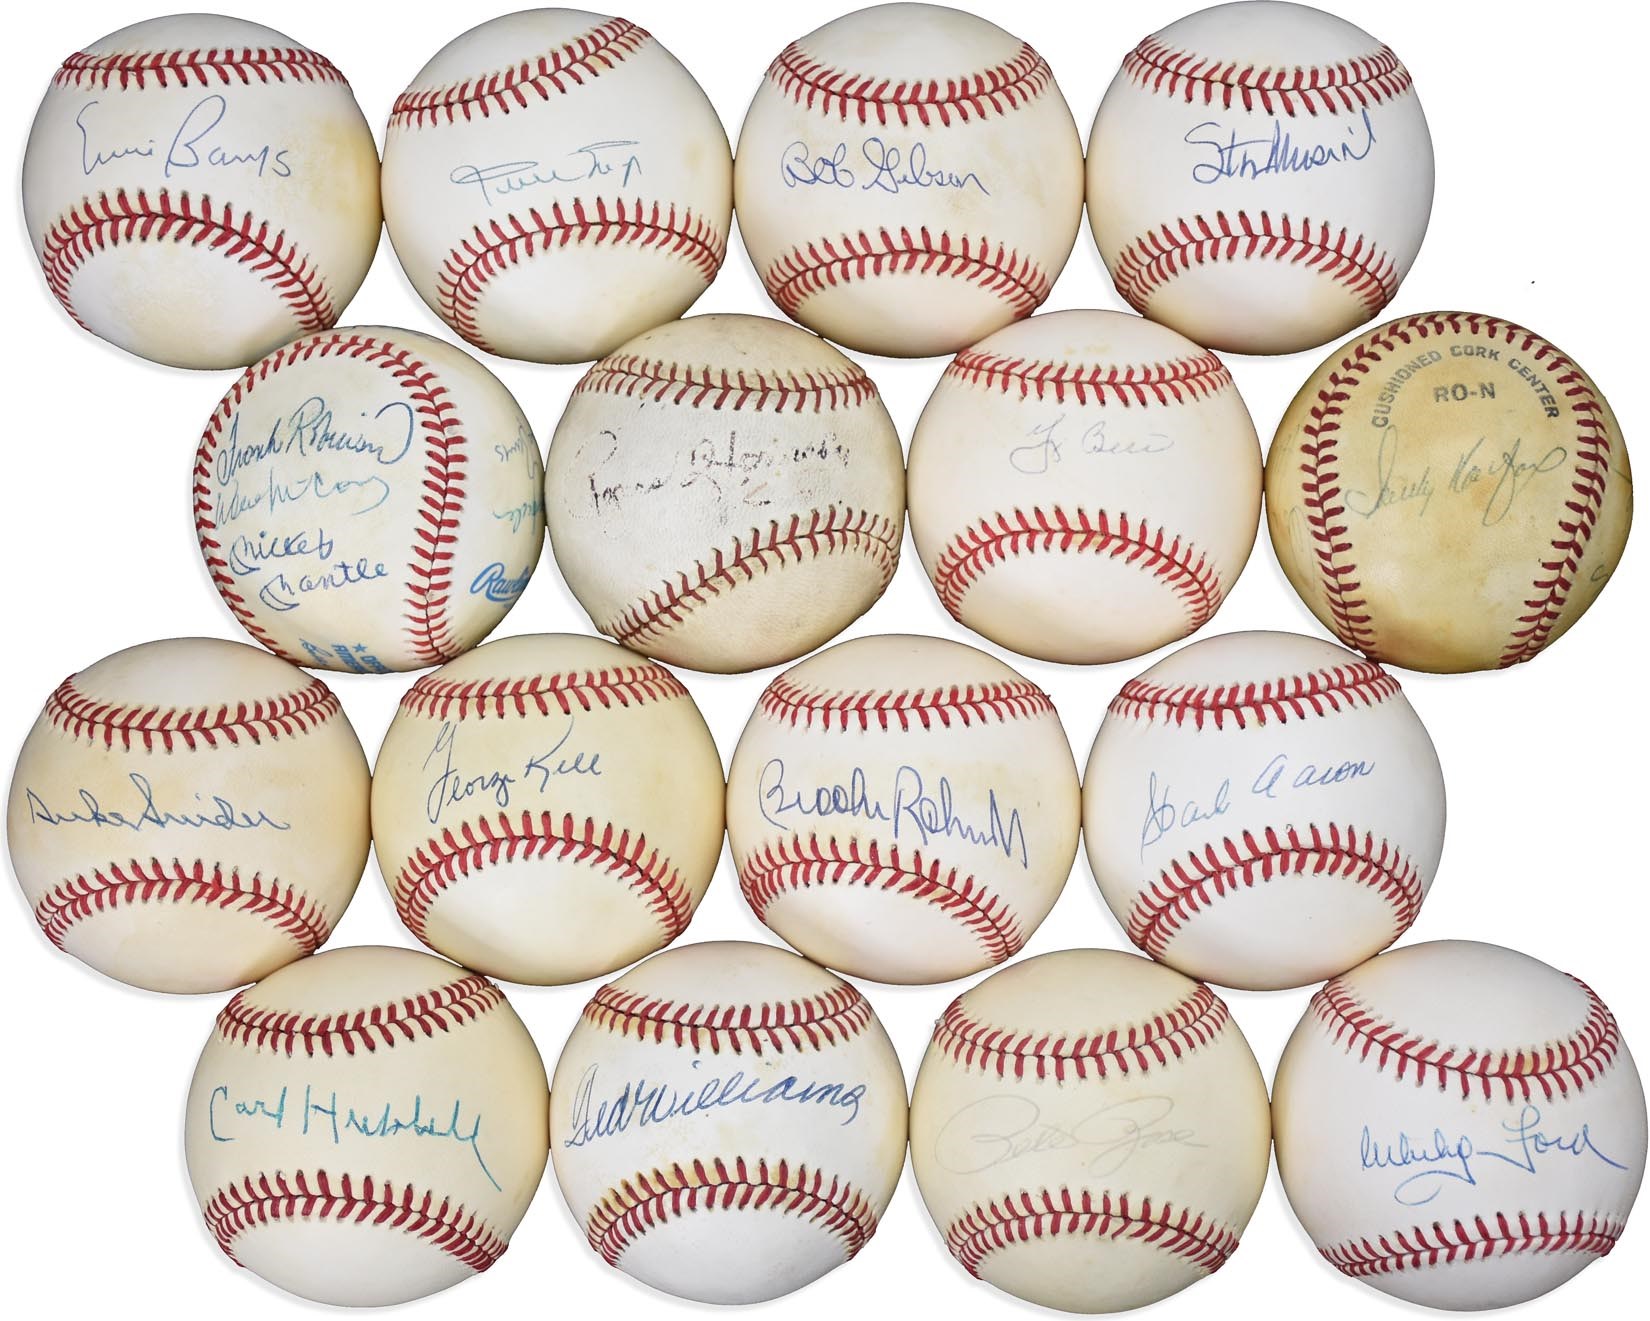 - Nice Signed Baseball Collection w/Rogers Hornsby Single-Signed, 500 HR Club & Clemente (40+)